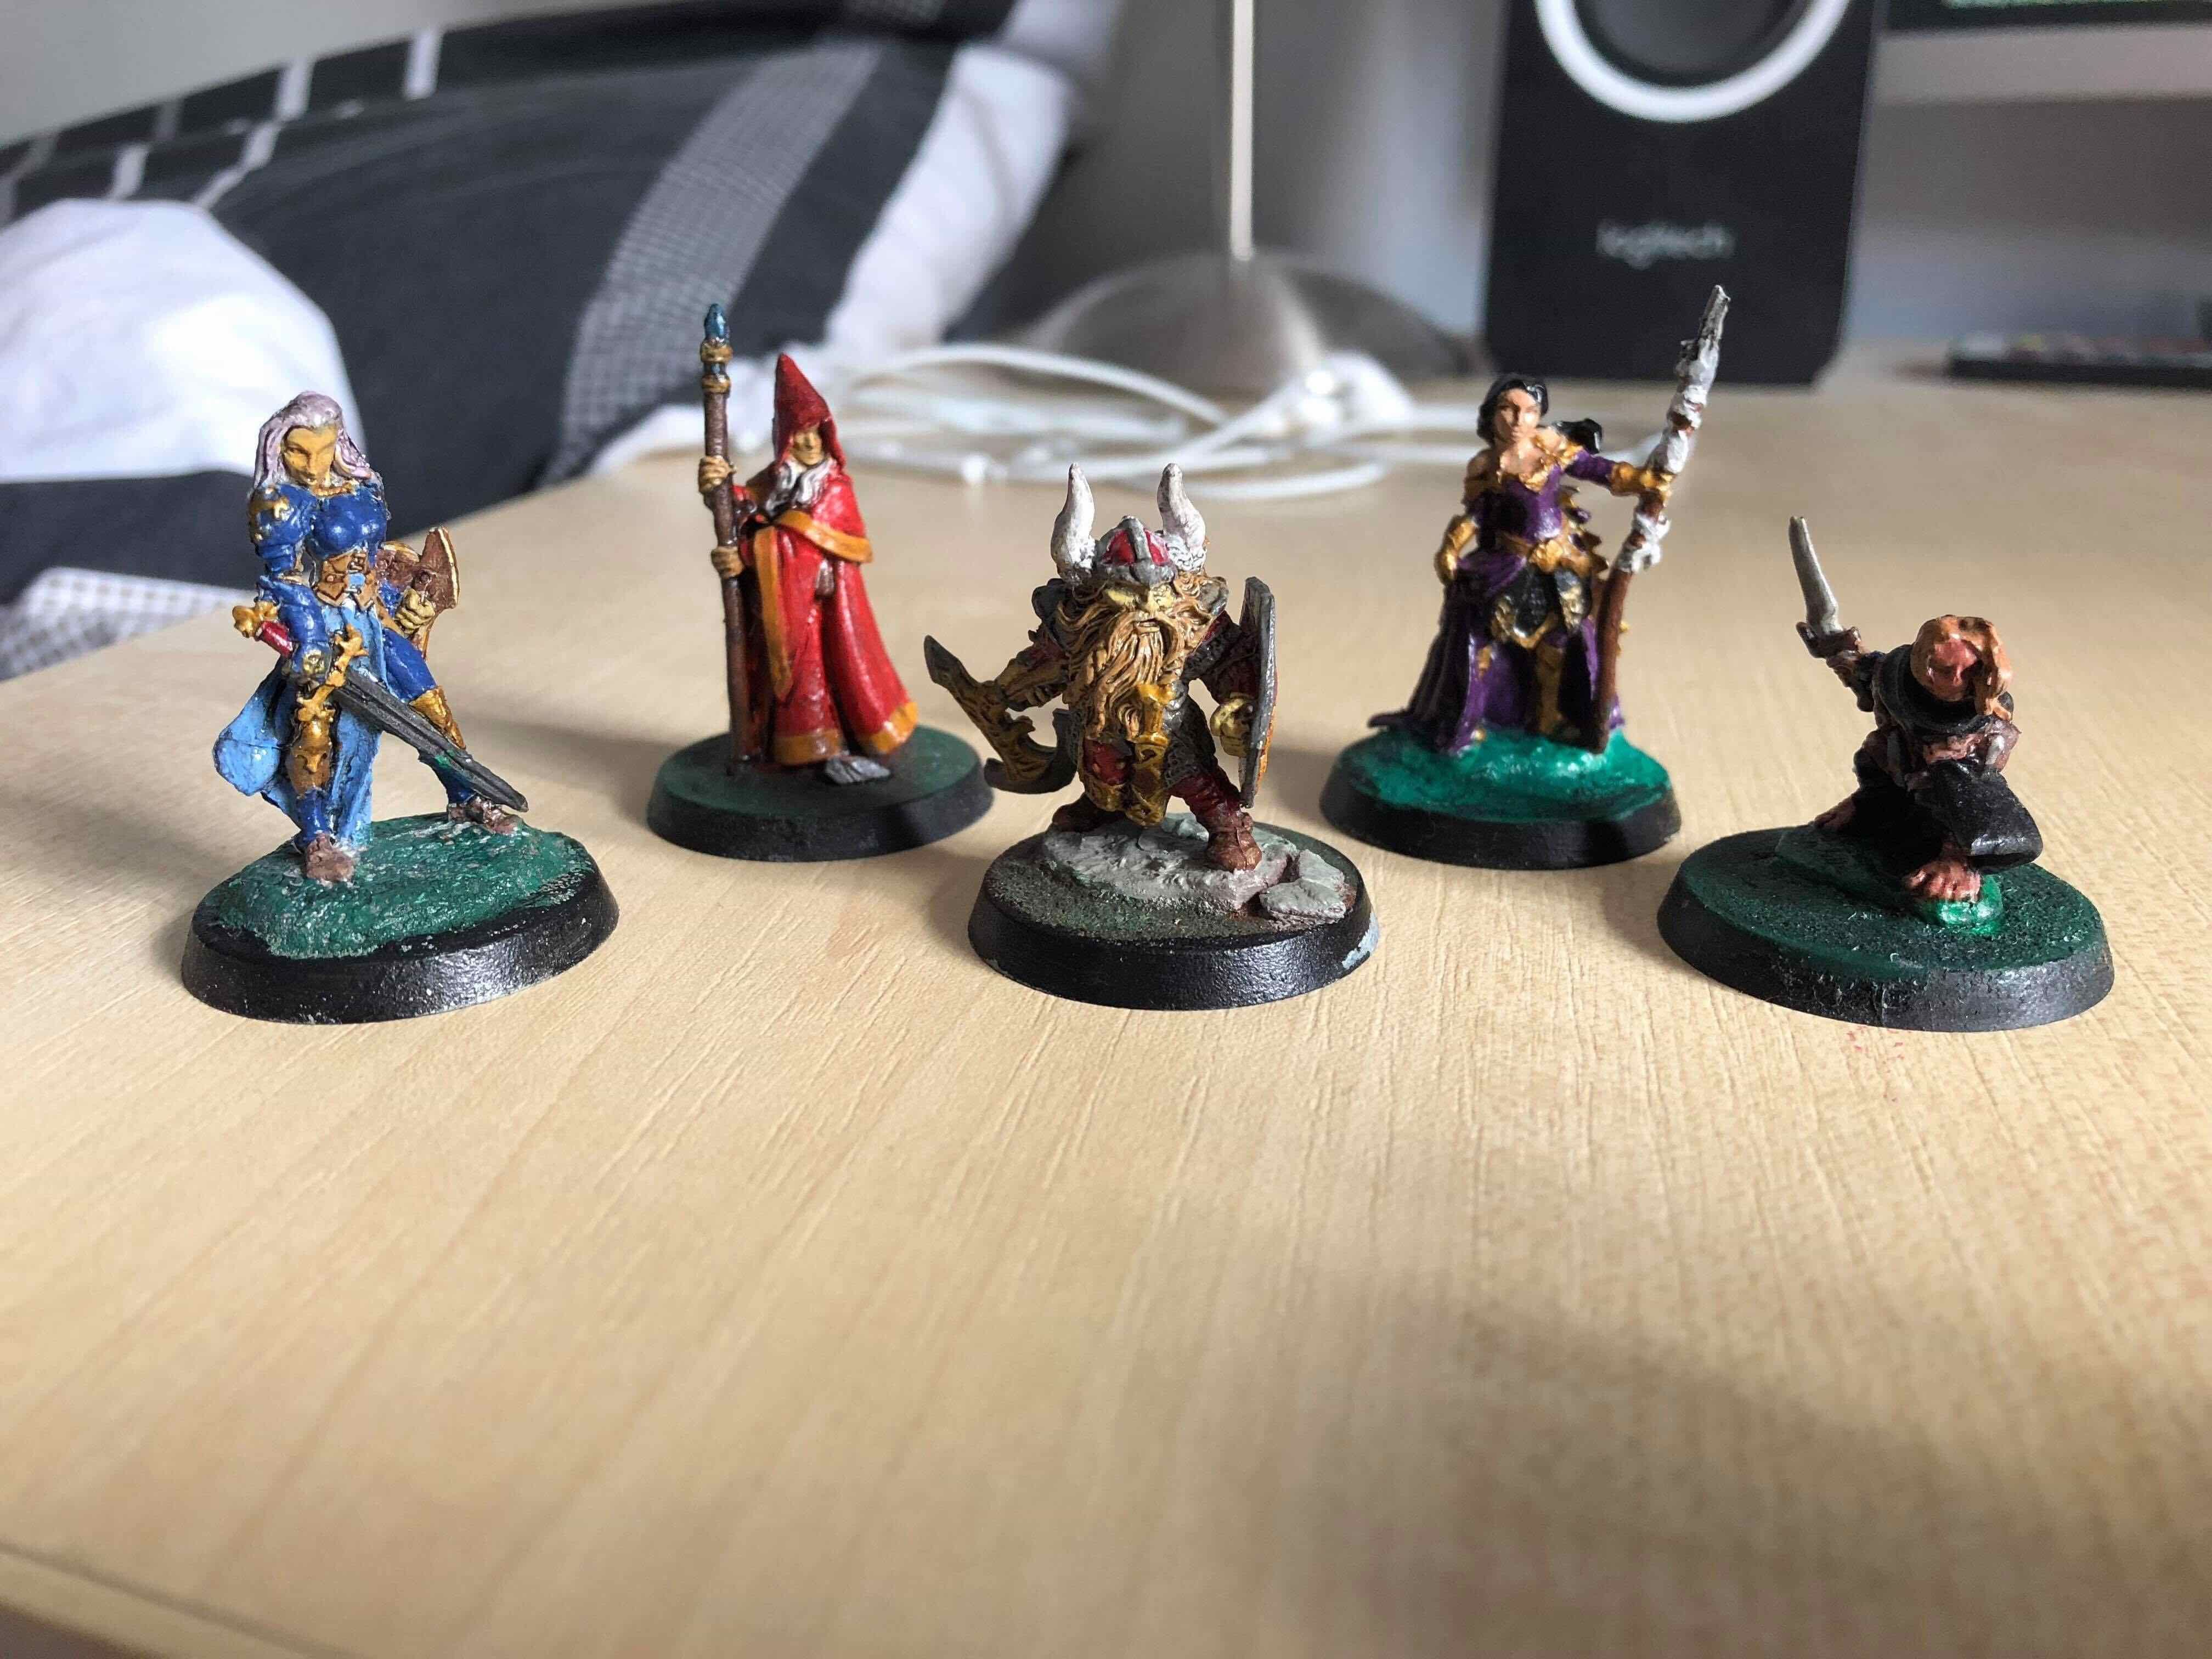 Miniature characters from D&D